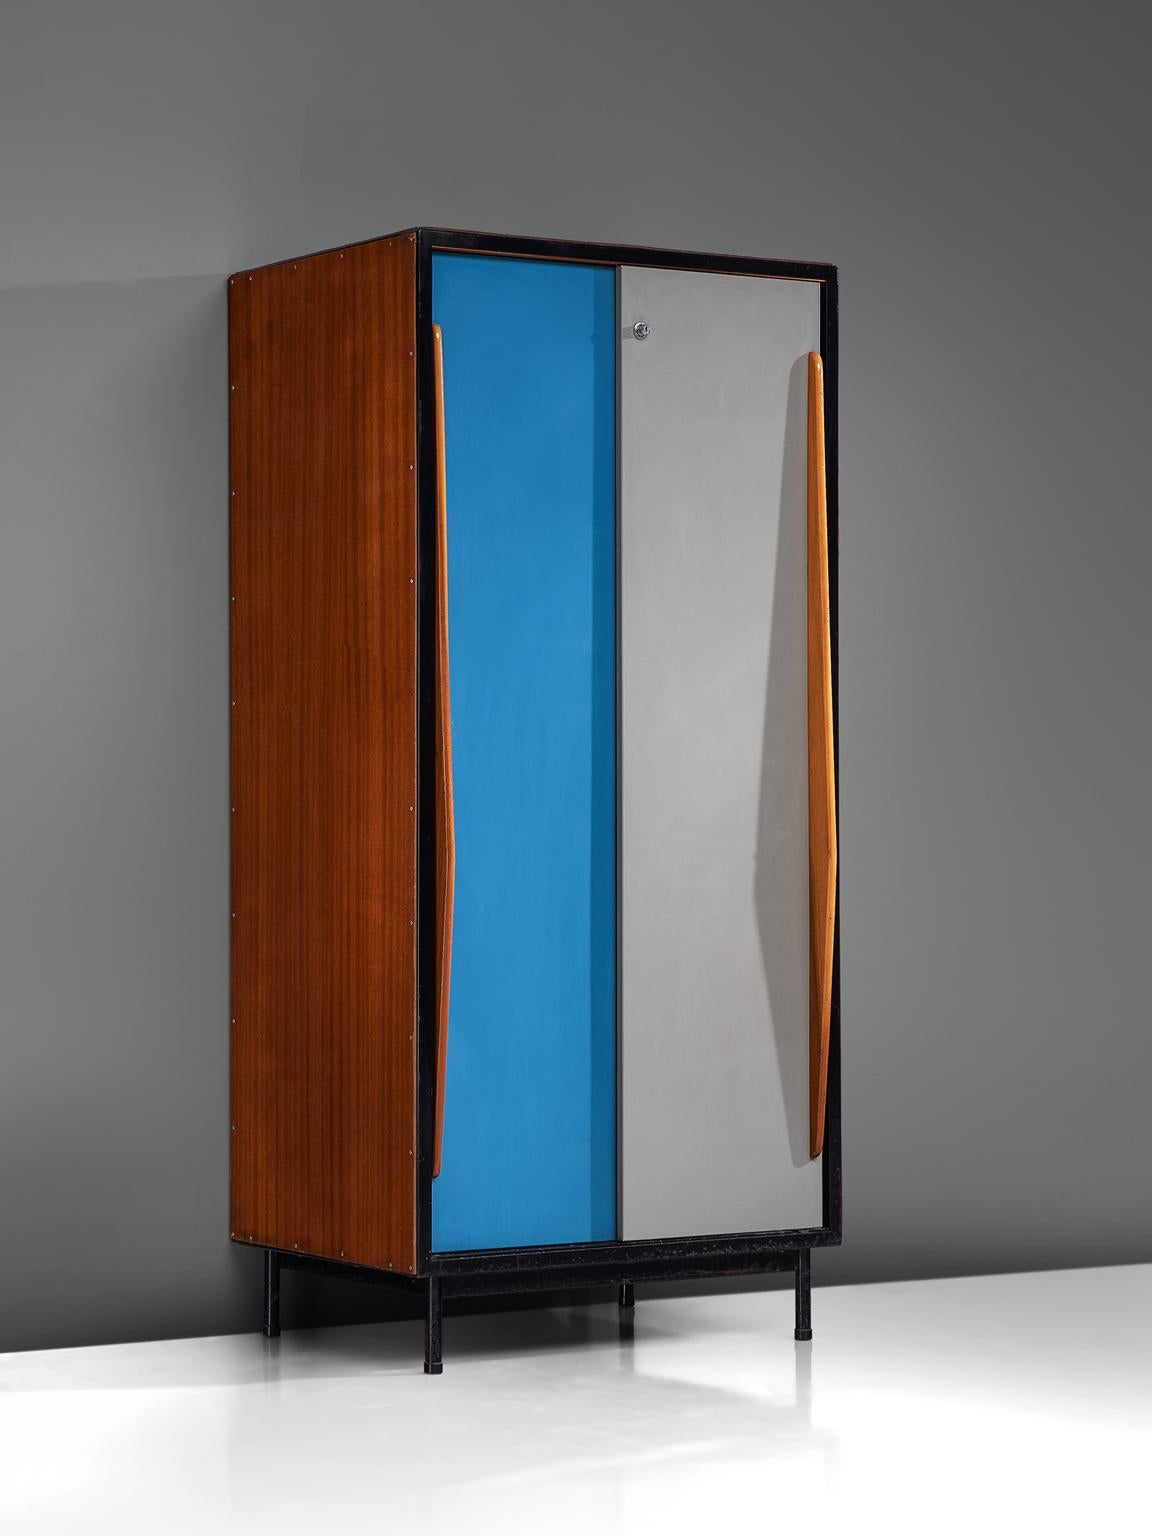 Willy van der Meeren for Tubax, cabinet in wood, mahogany and metal by Belgium, 1952. 

Nice early example of Industrial design from the Belgium modernist stream, designed by Willy van der Meeren. Originally designed for use in school buildings